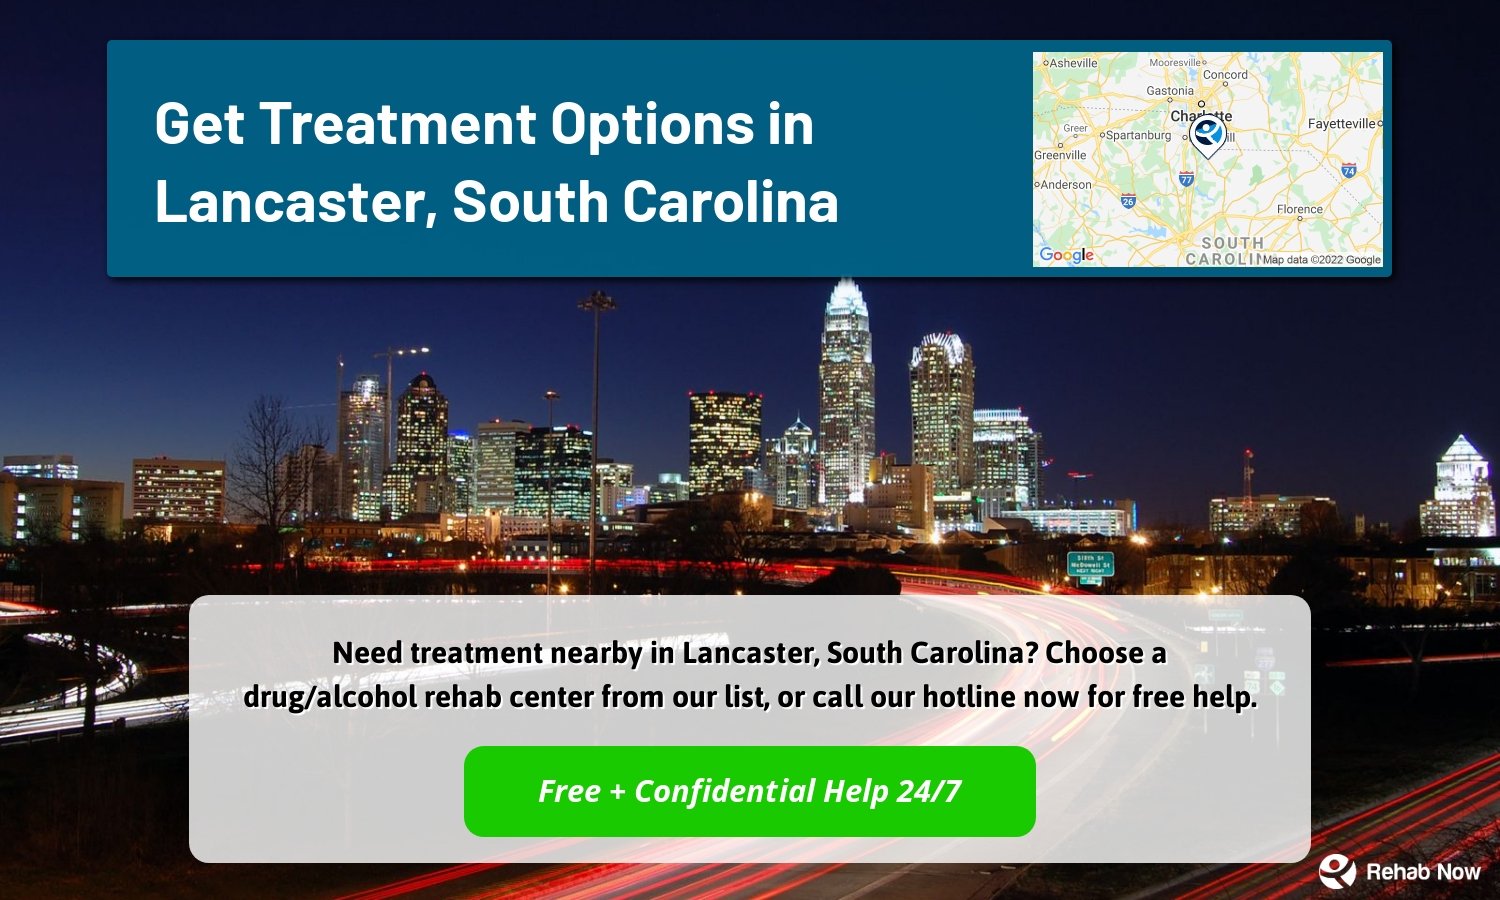 Need treatment nearby in Lancaster, South Carolina? Choose a drug/alcohol rehab center from our list, or call our hotline now for free help.